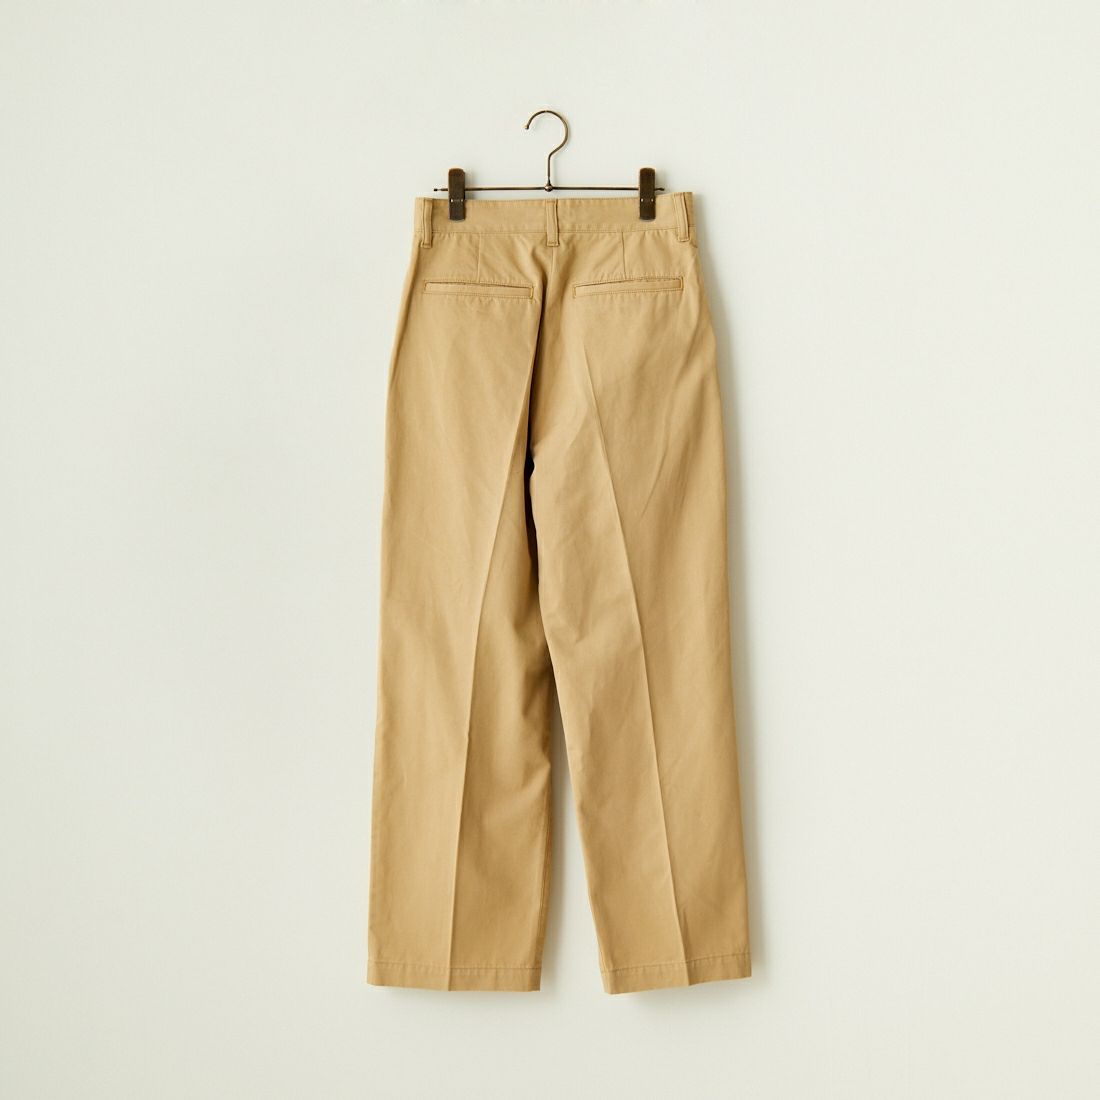 Jeans Factory Clothes [ジーンズファクトリークローズ] タックトラウザー [IN7-PT-4] BEIGE